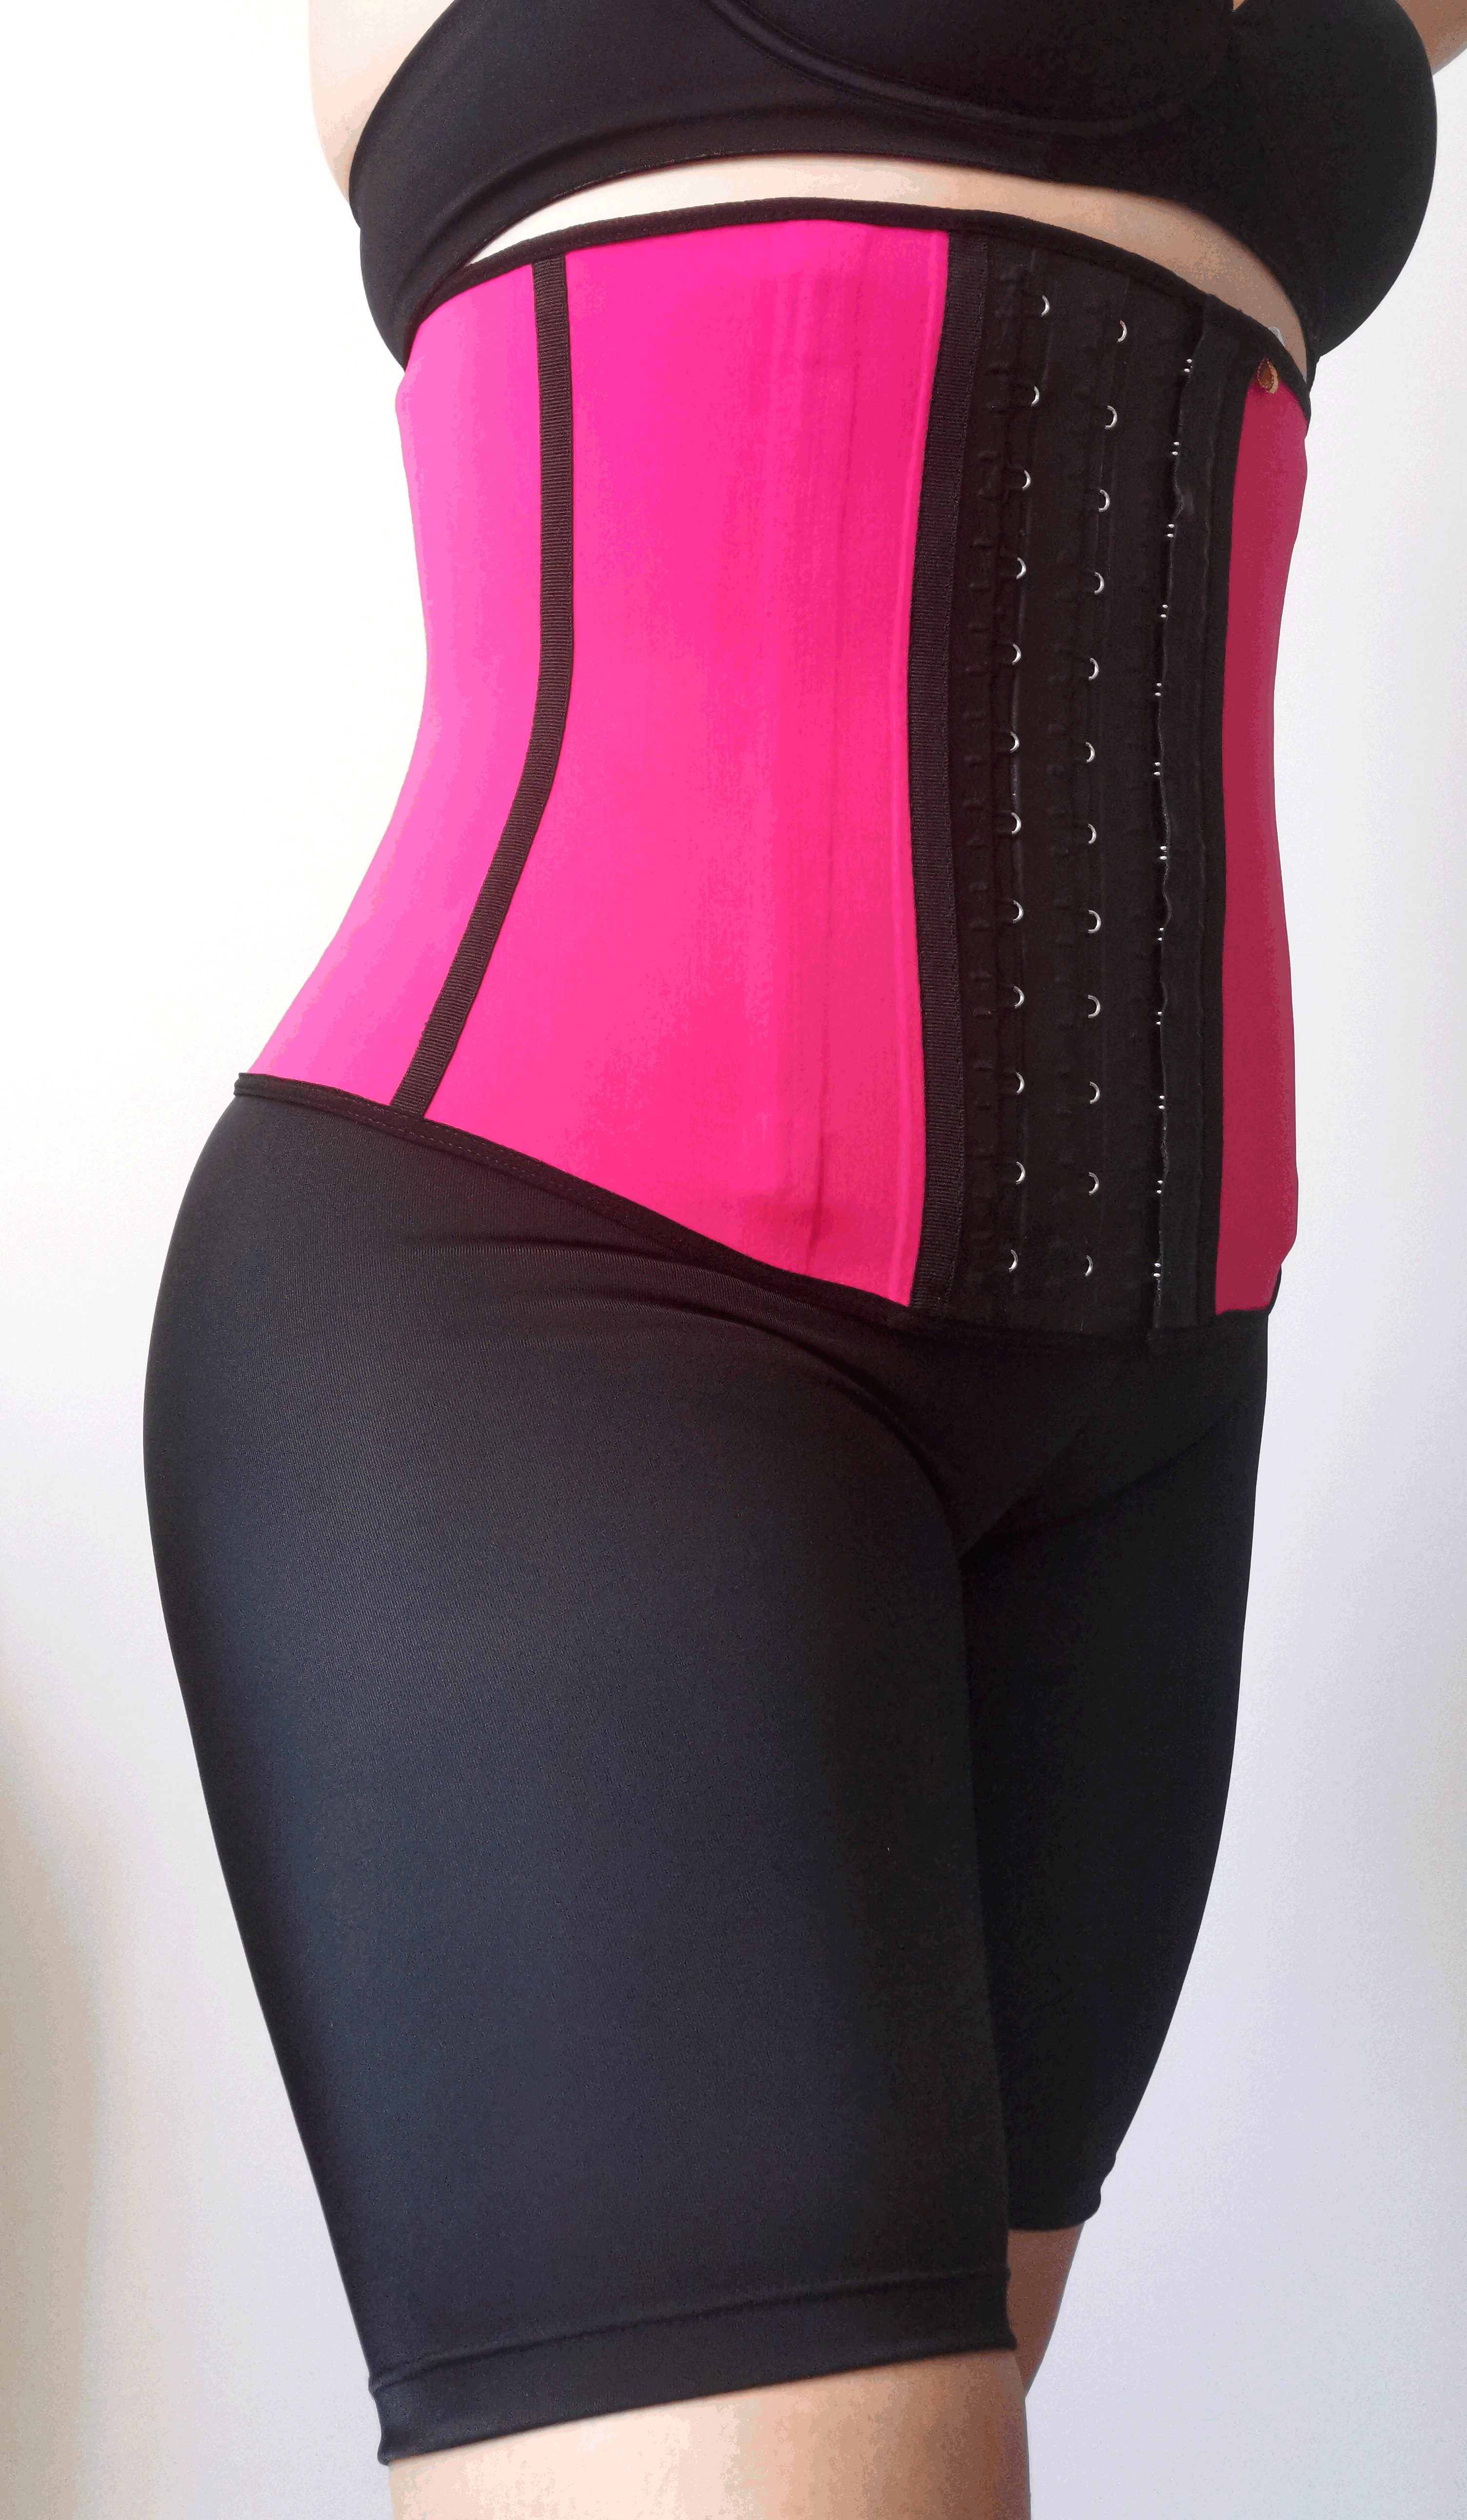 Latex Waist Trainer! Ideal for post partum and daily use